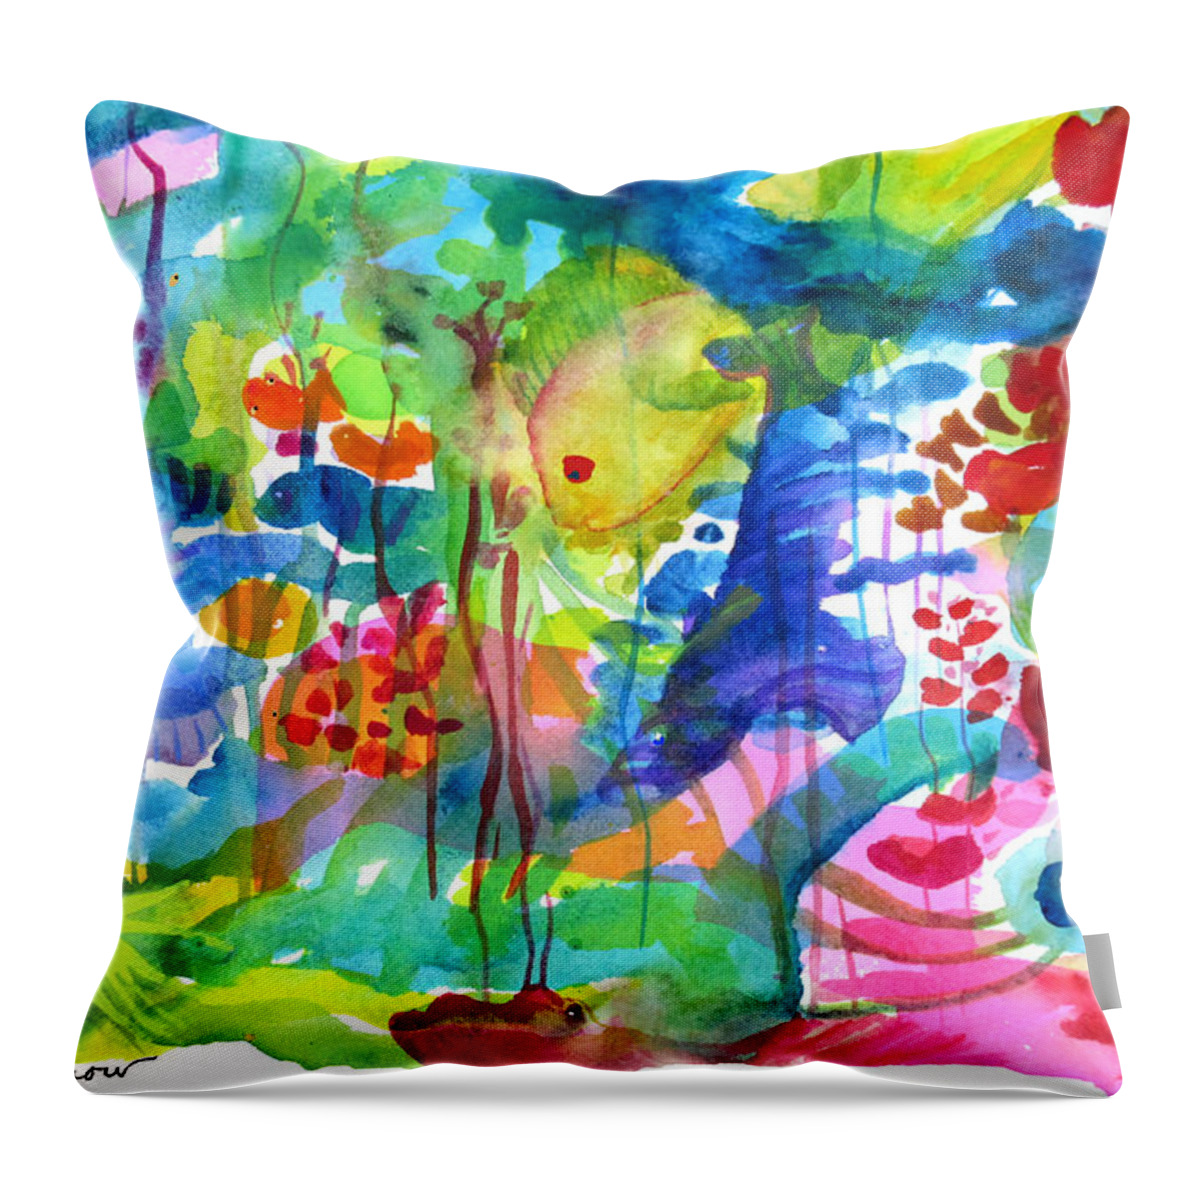 Tropical Fish Throw Pillow featuring the painting See You In The Deep End by Deborah Burow